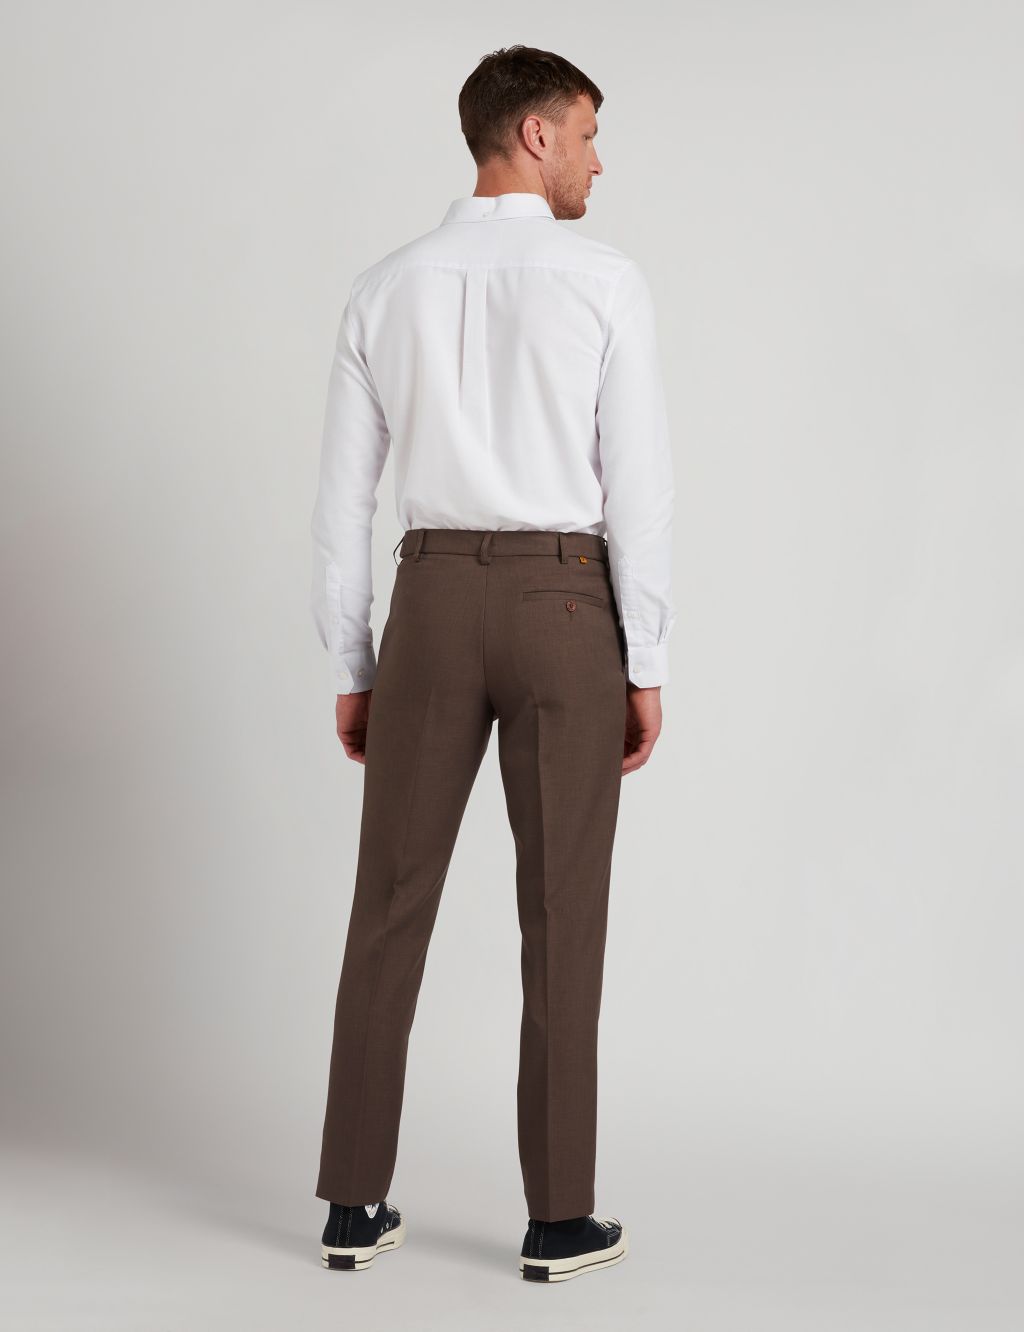 Tailored Fit Smart Trousers image 4